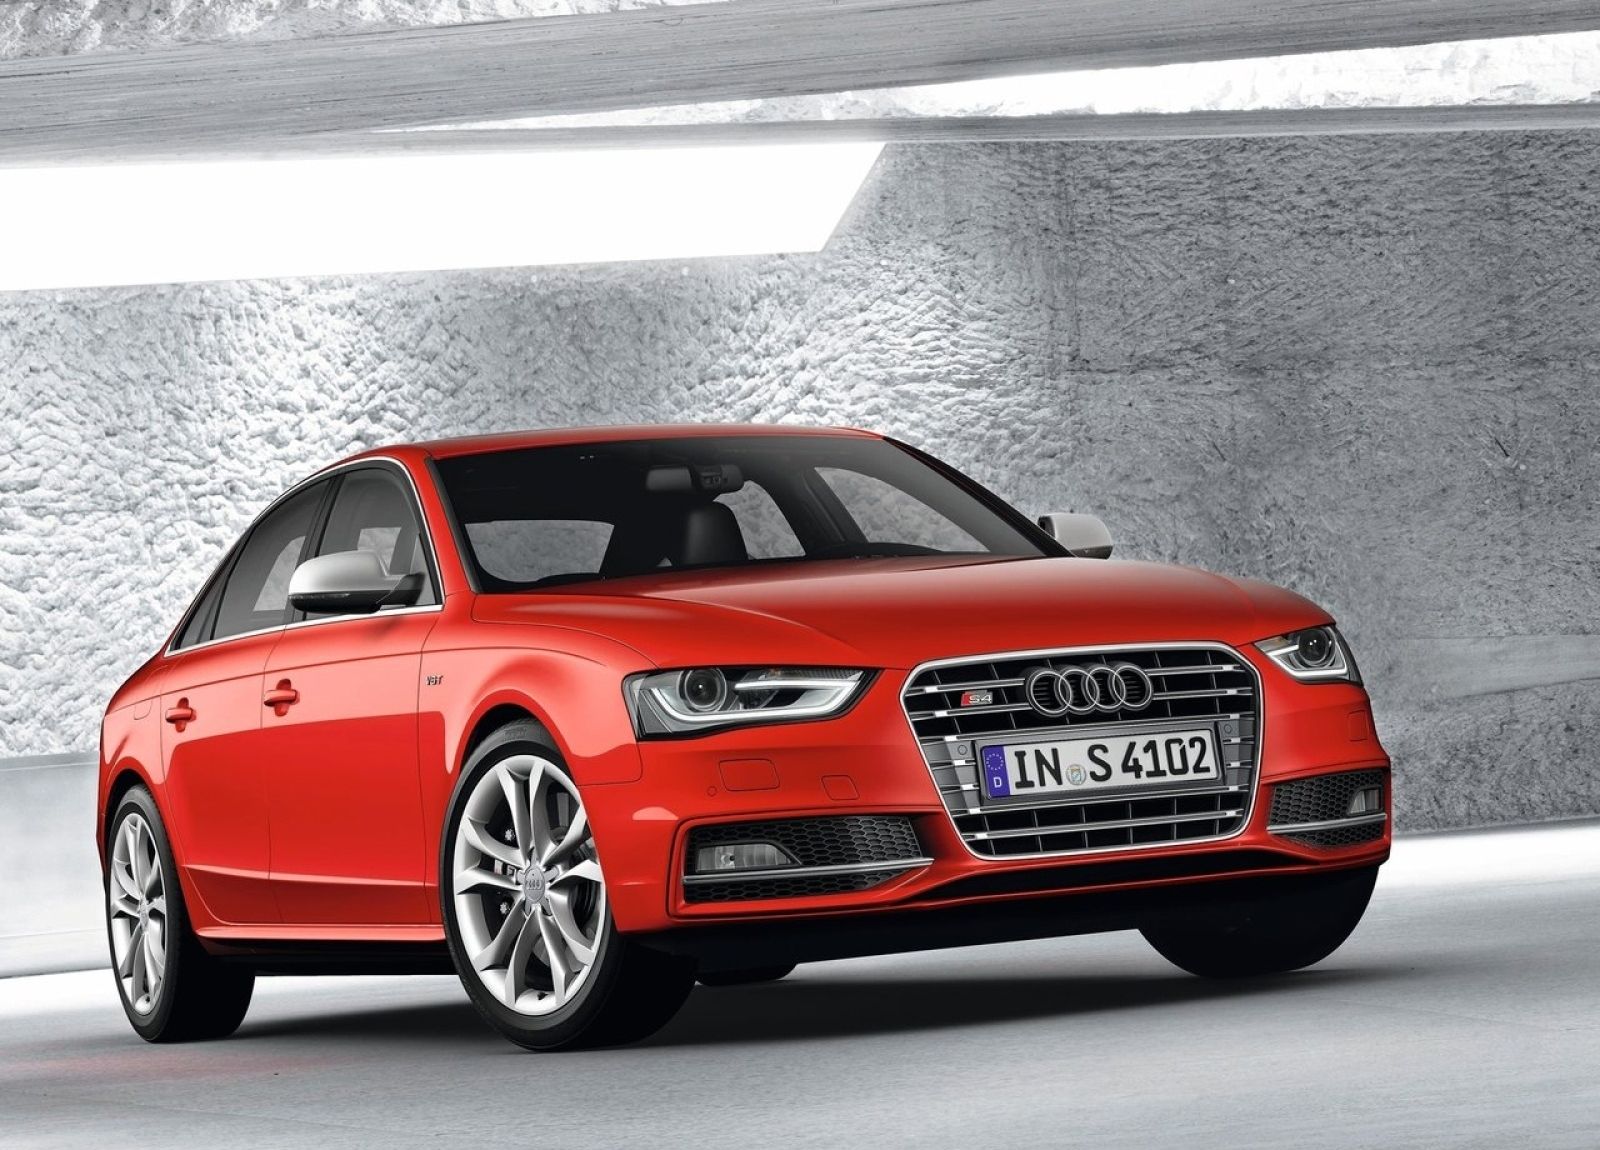 The World of Audi - Audi Forum | News | Prices | Technical ...